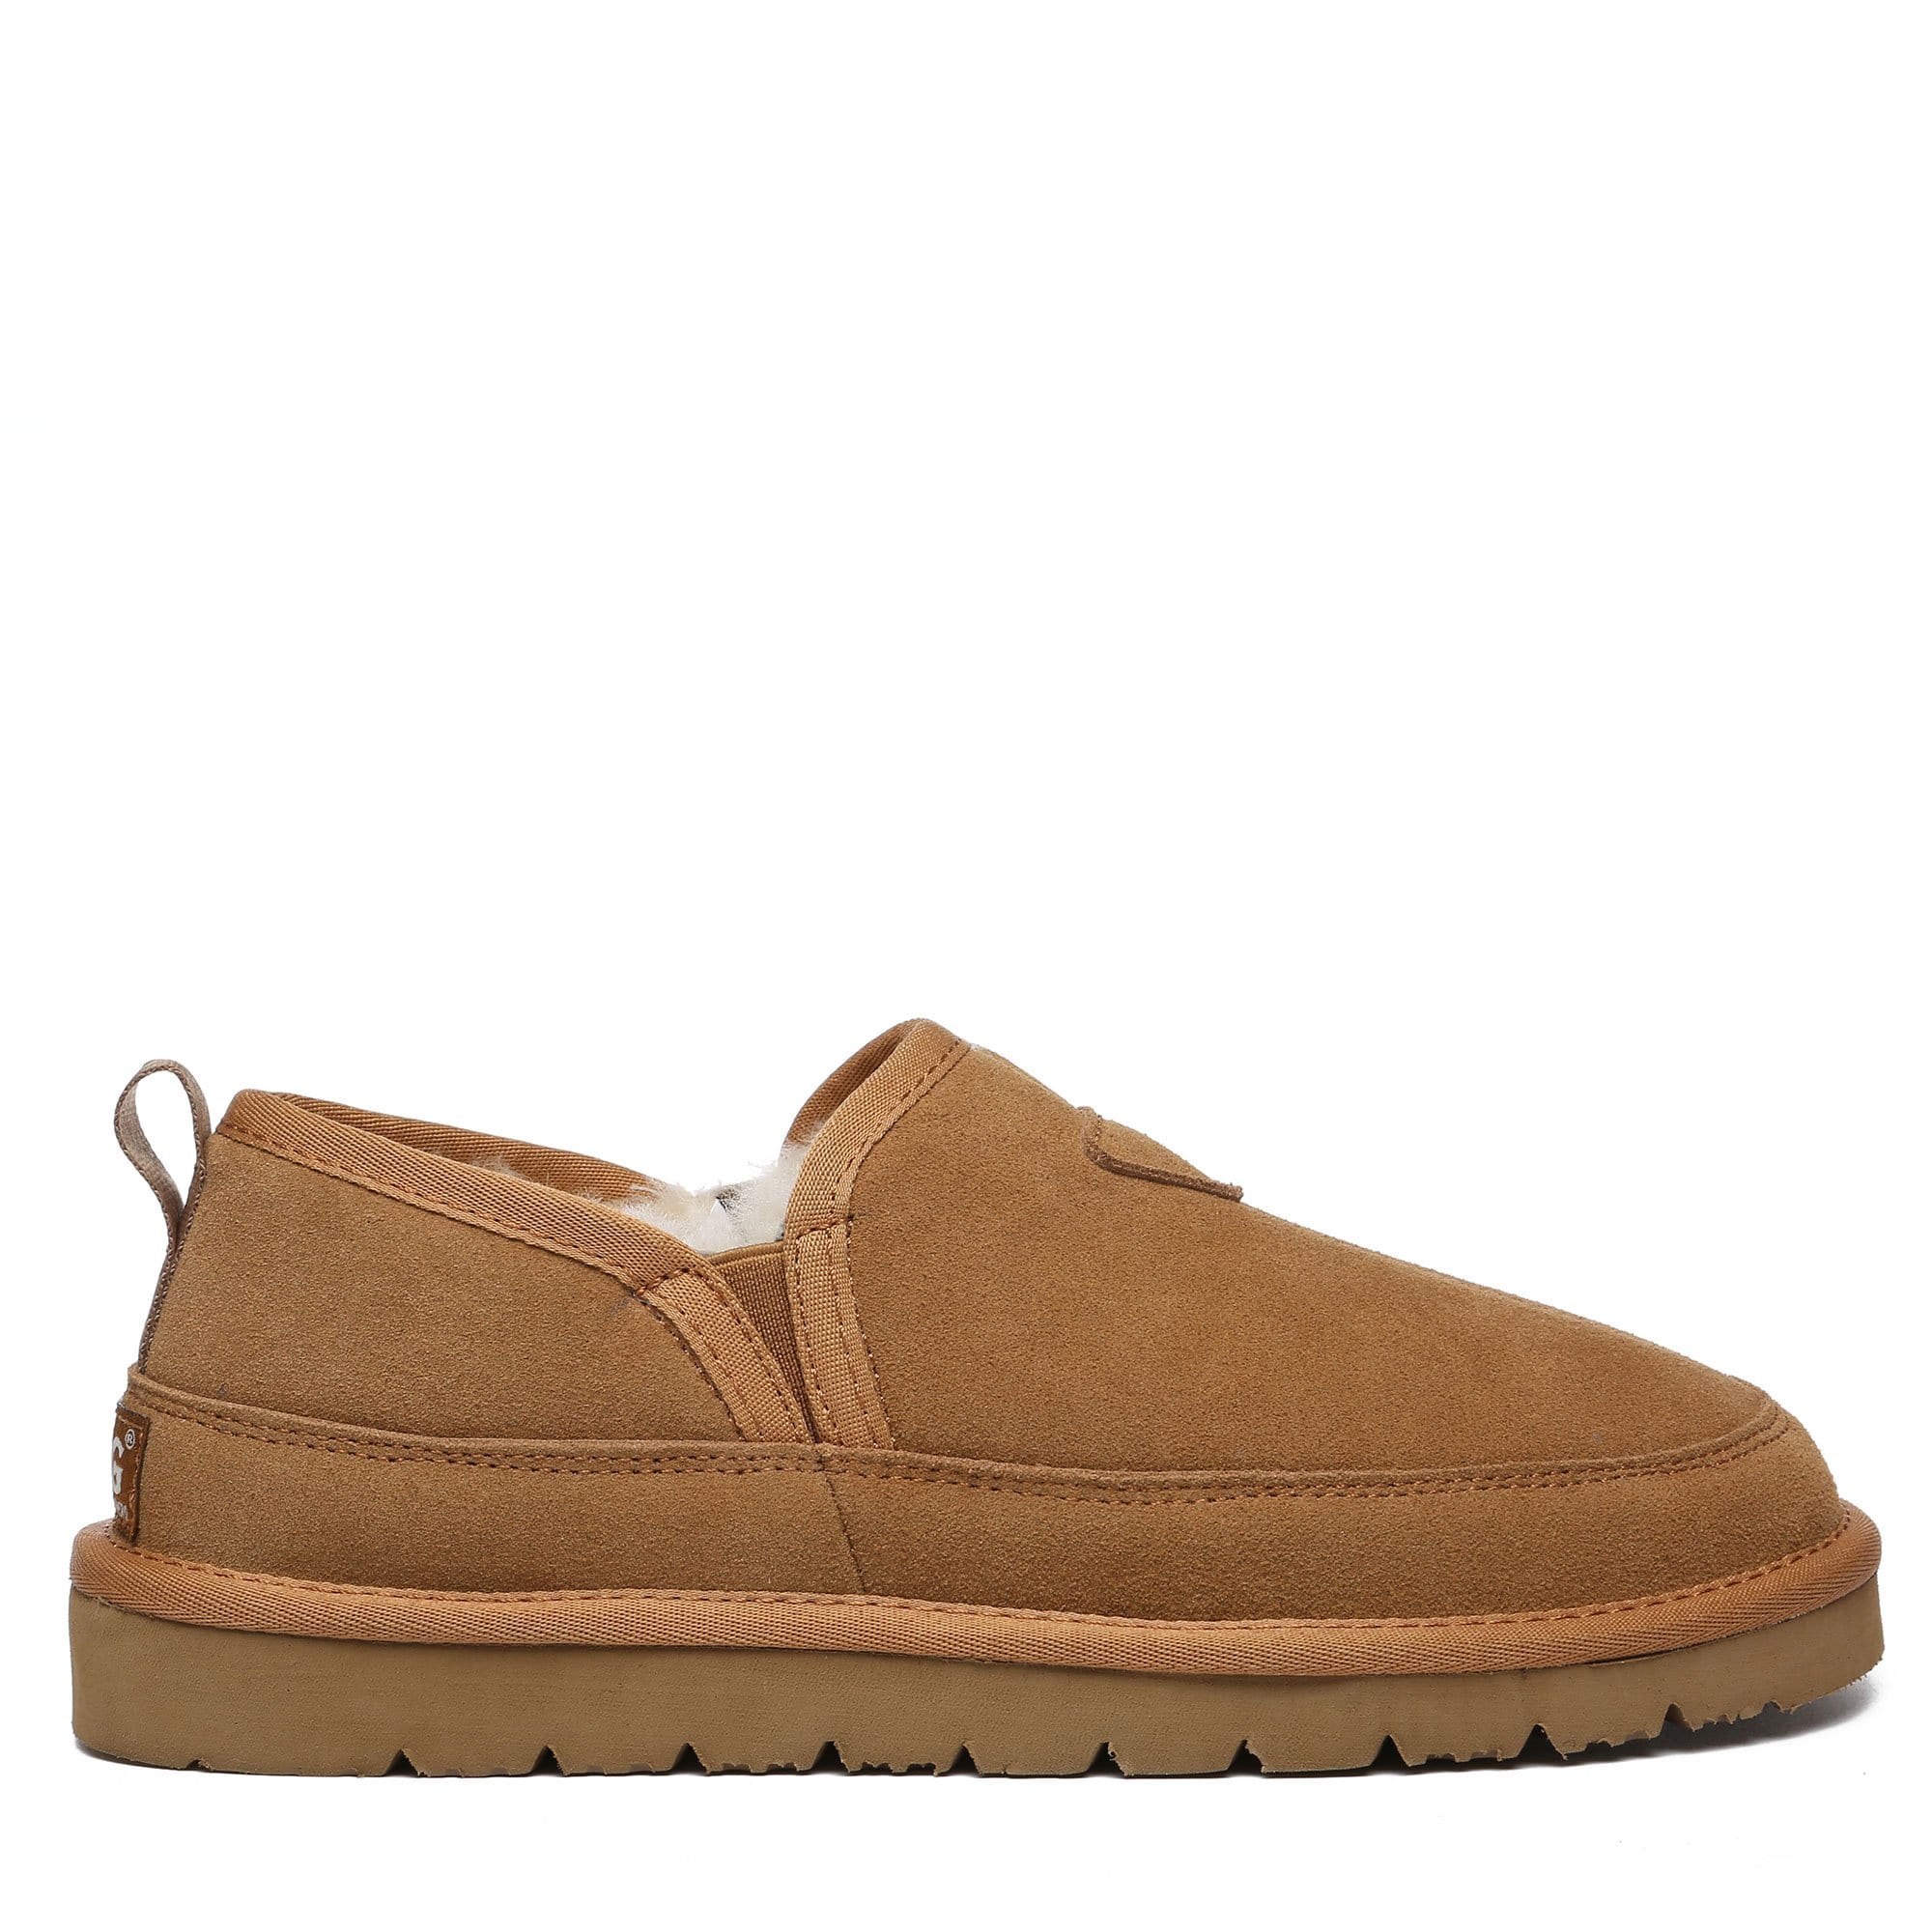 UGG Harry Moccasin Slippers